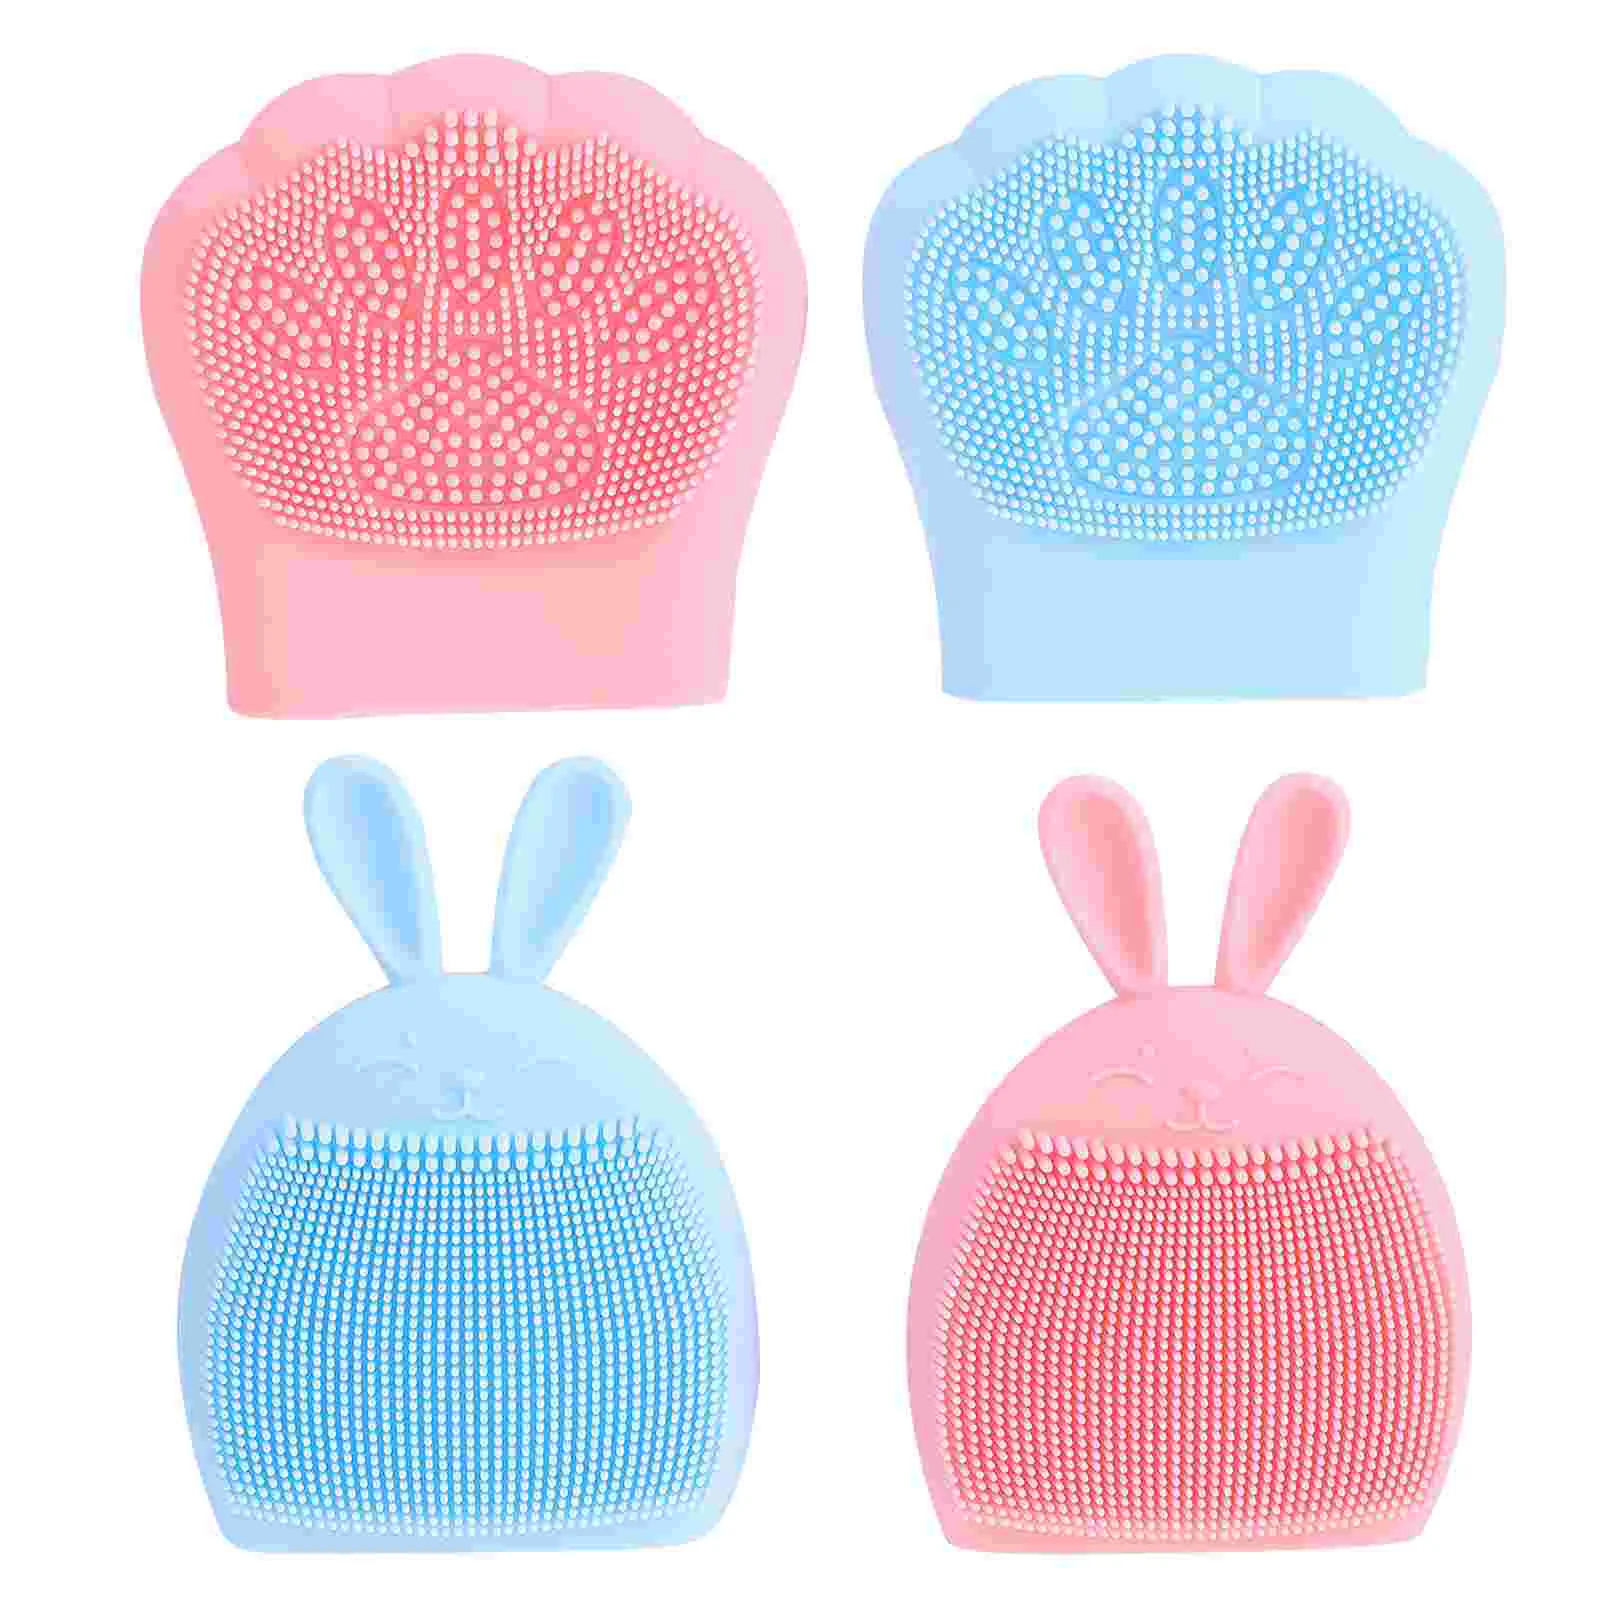 

Brush Face Facial Cleansing Silicone Wash Pore Cleanser Scrubber Scrub Blackhead Nose Pad Cleaning Exfoliator Exfoliating Manual